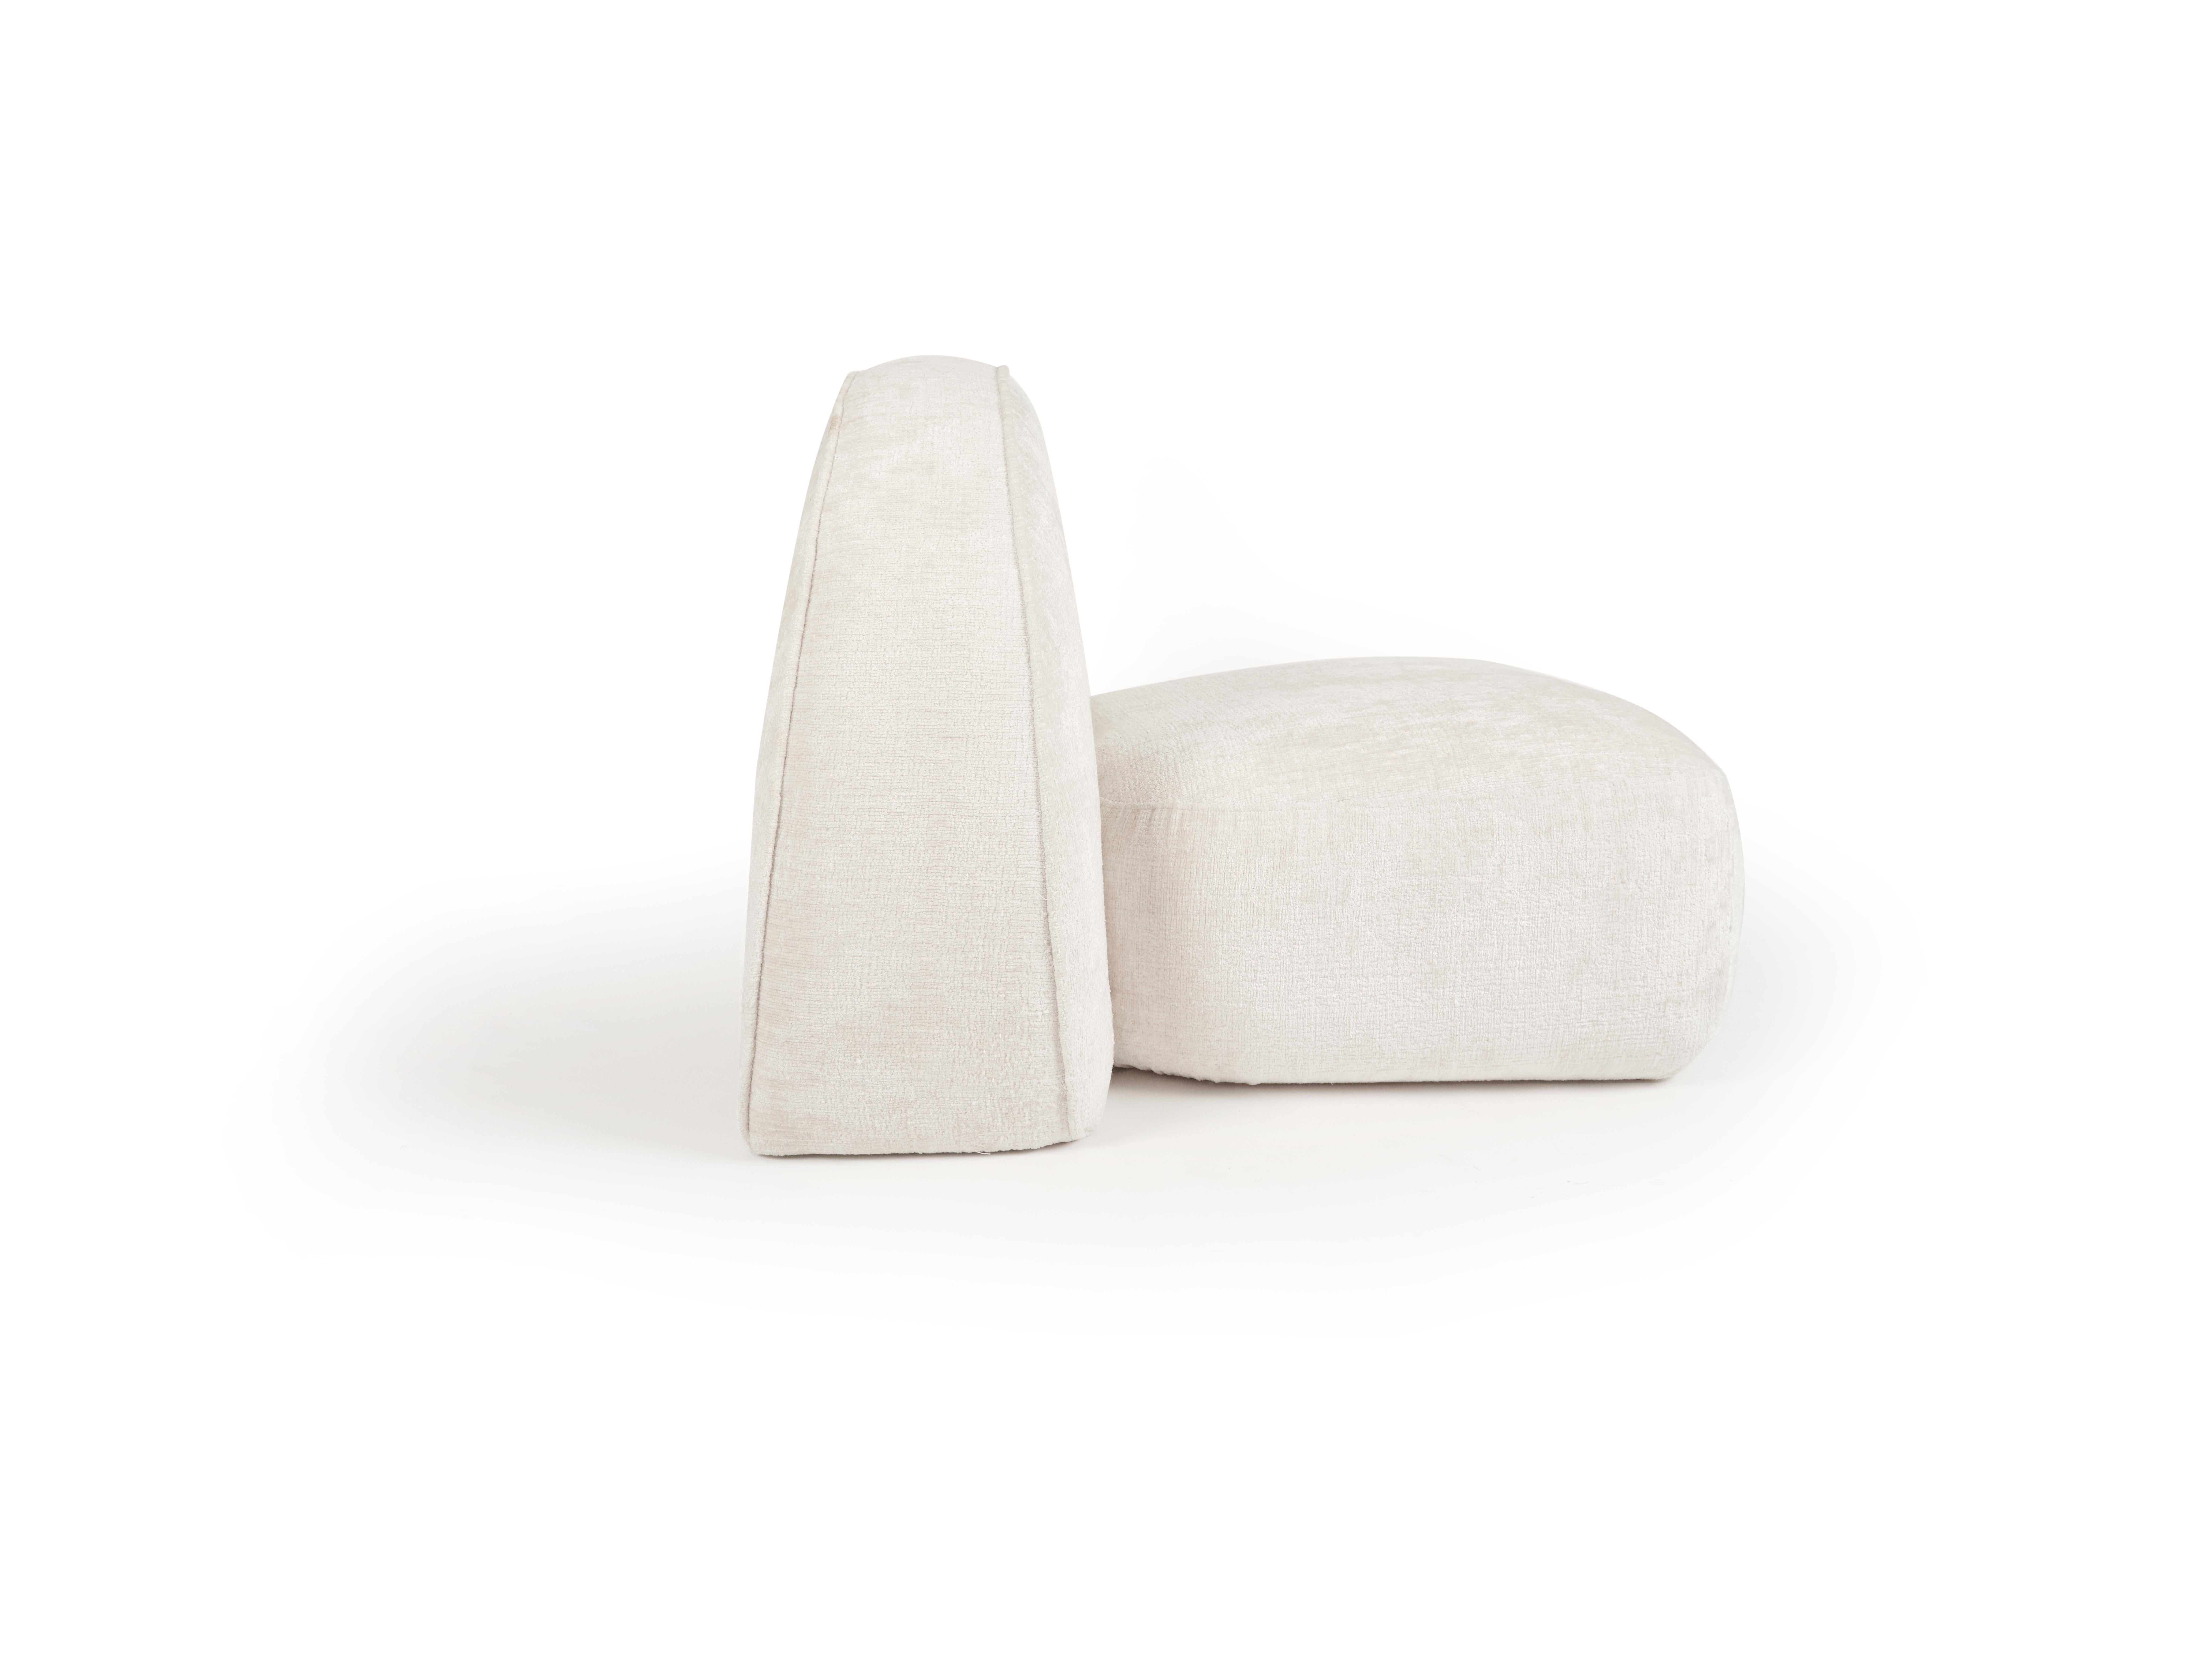 The seats can be located especially in places such as in front of the fireplace at residences. They are handcrafted by covering soft textured fabric on sponge.